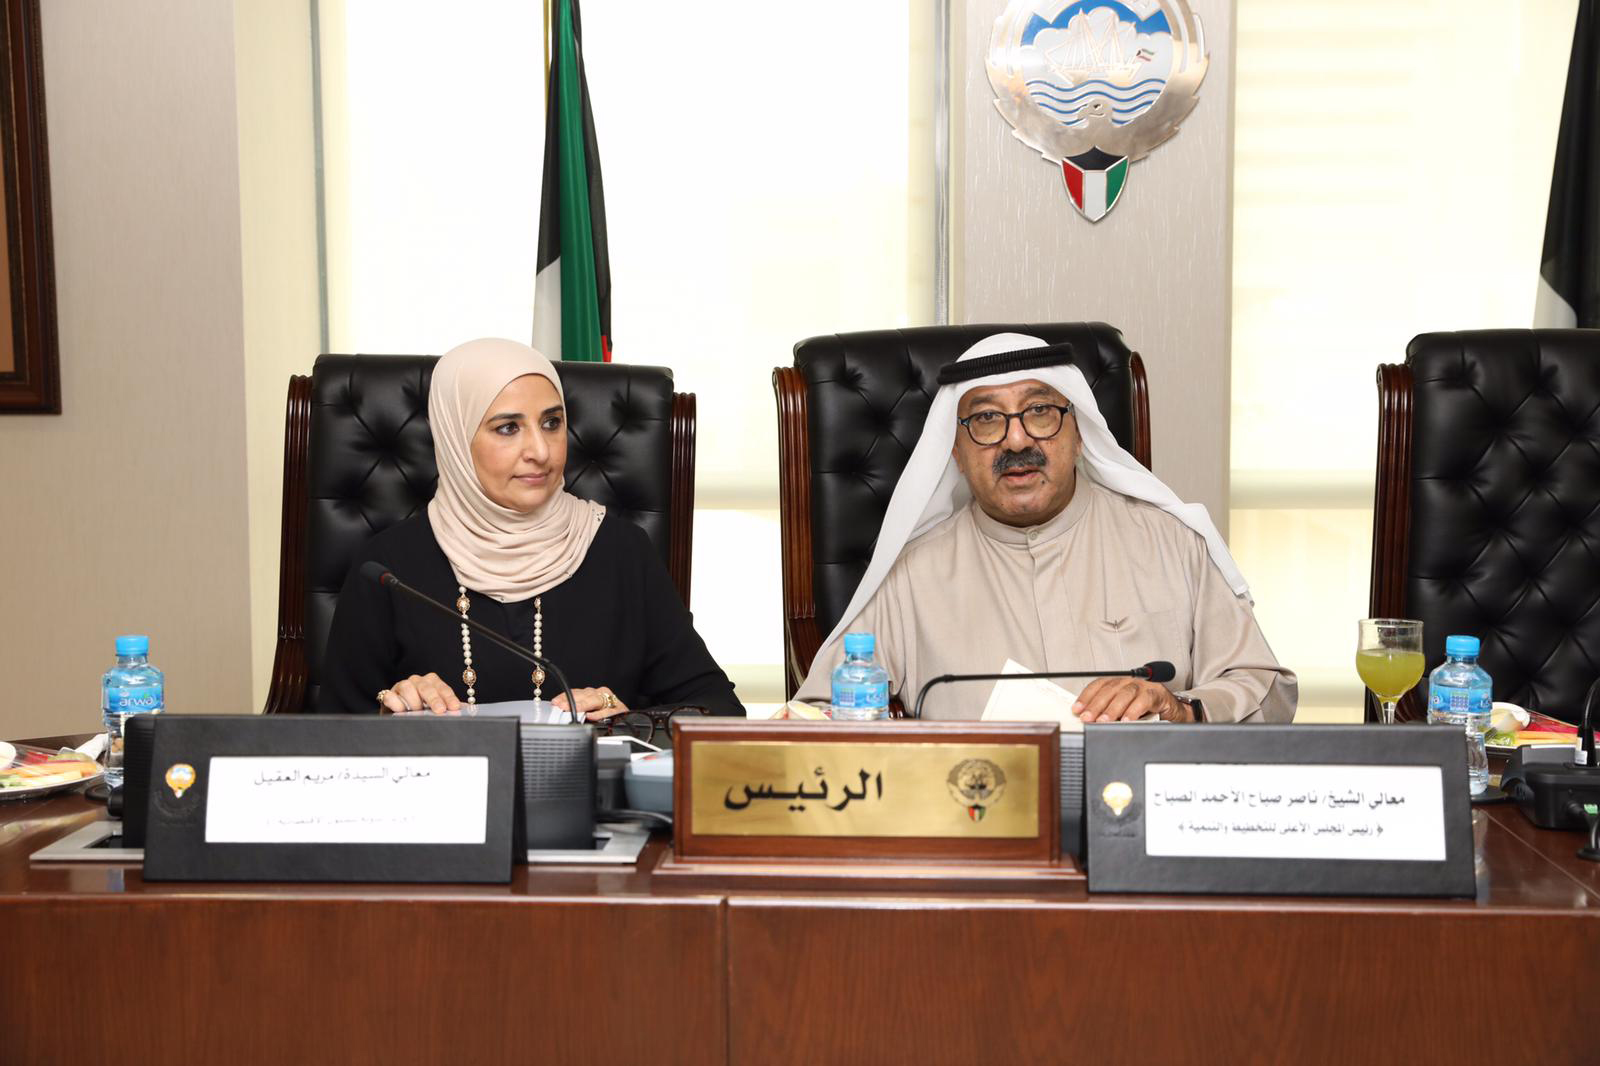 First Deputy Prime Minister, Minister of Defense and Chief of the General Secretariat of the Supreme Council for Planning and Development (SCPD) Sheikh Nasser Sabah Al-Ahmad Al-Sabah chaired the council's sixth meeting of the second session for 2019